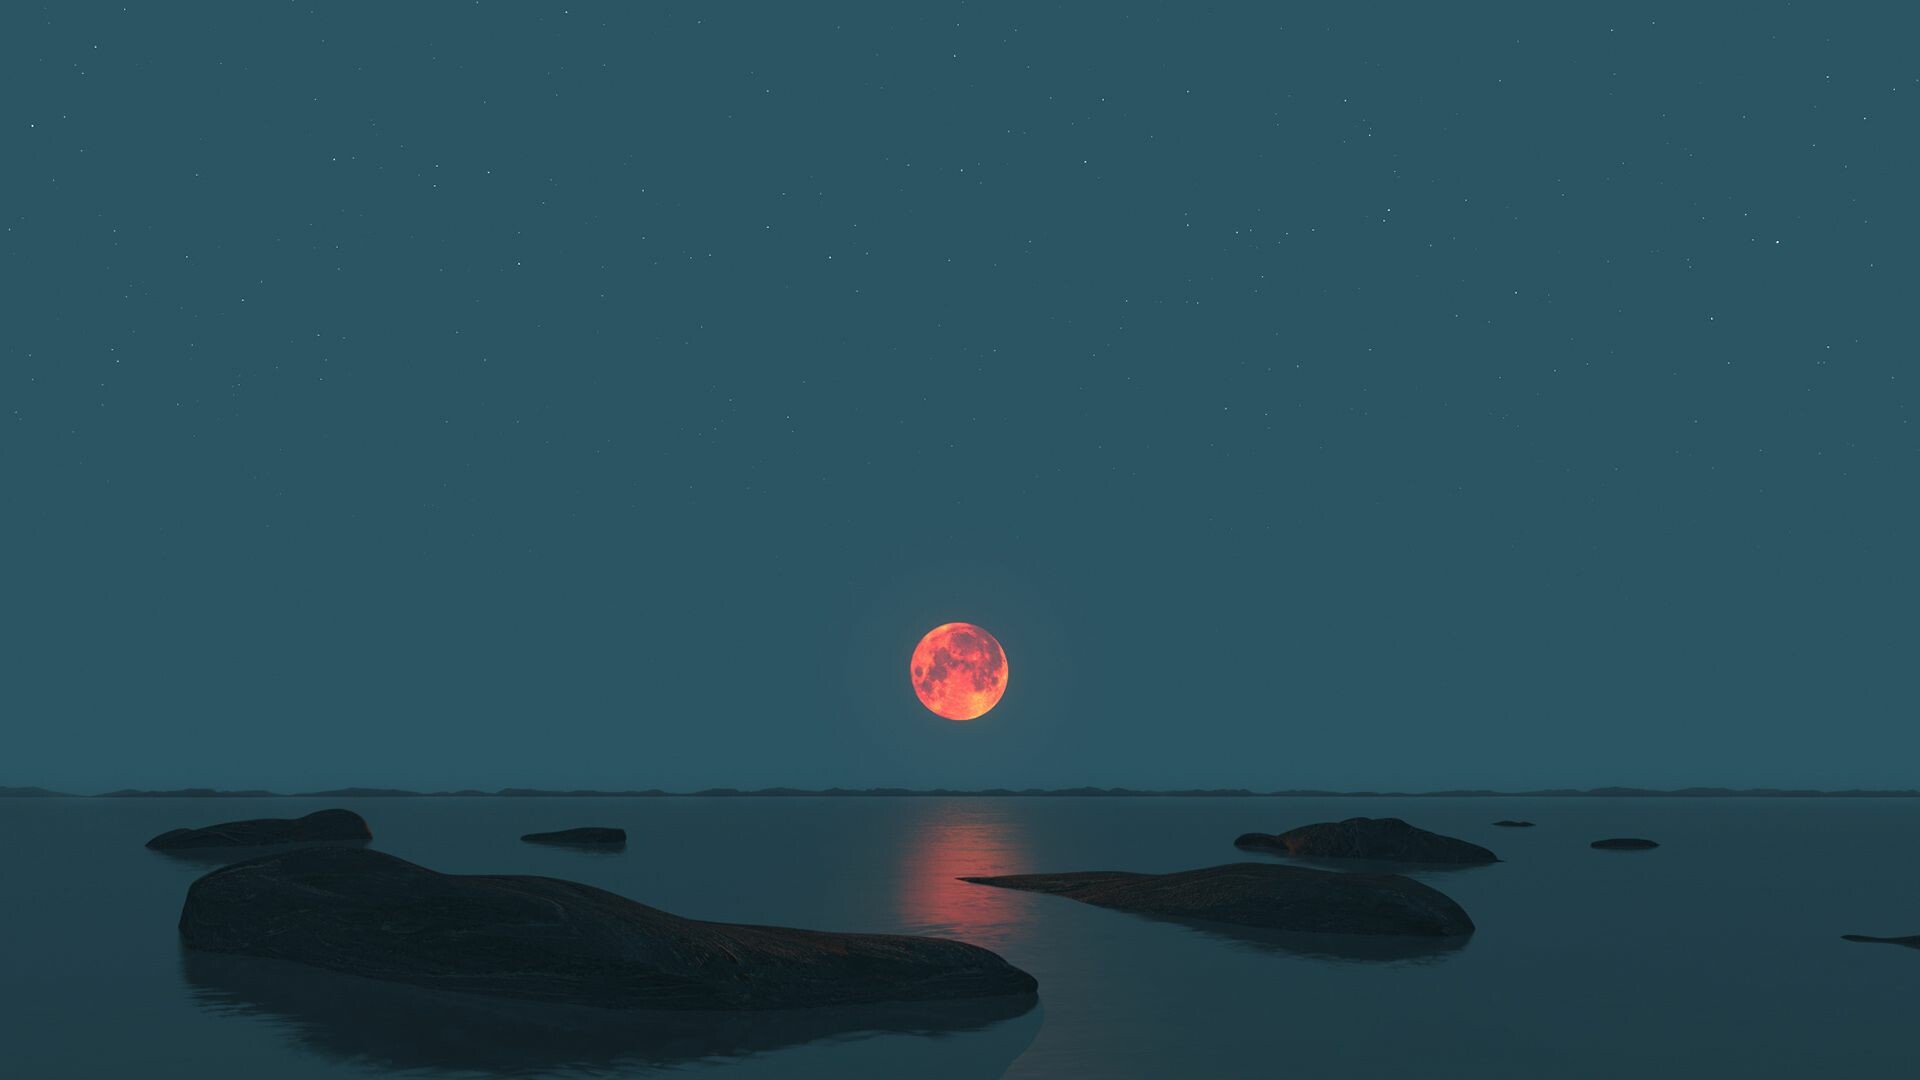 Blood Moon Wallpaper: HD, 4K, 5K for PC and Mobile. Download free image for iPhone, Android